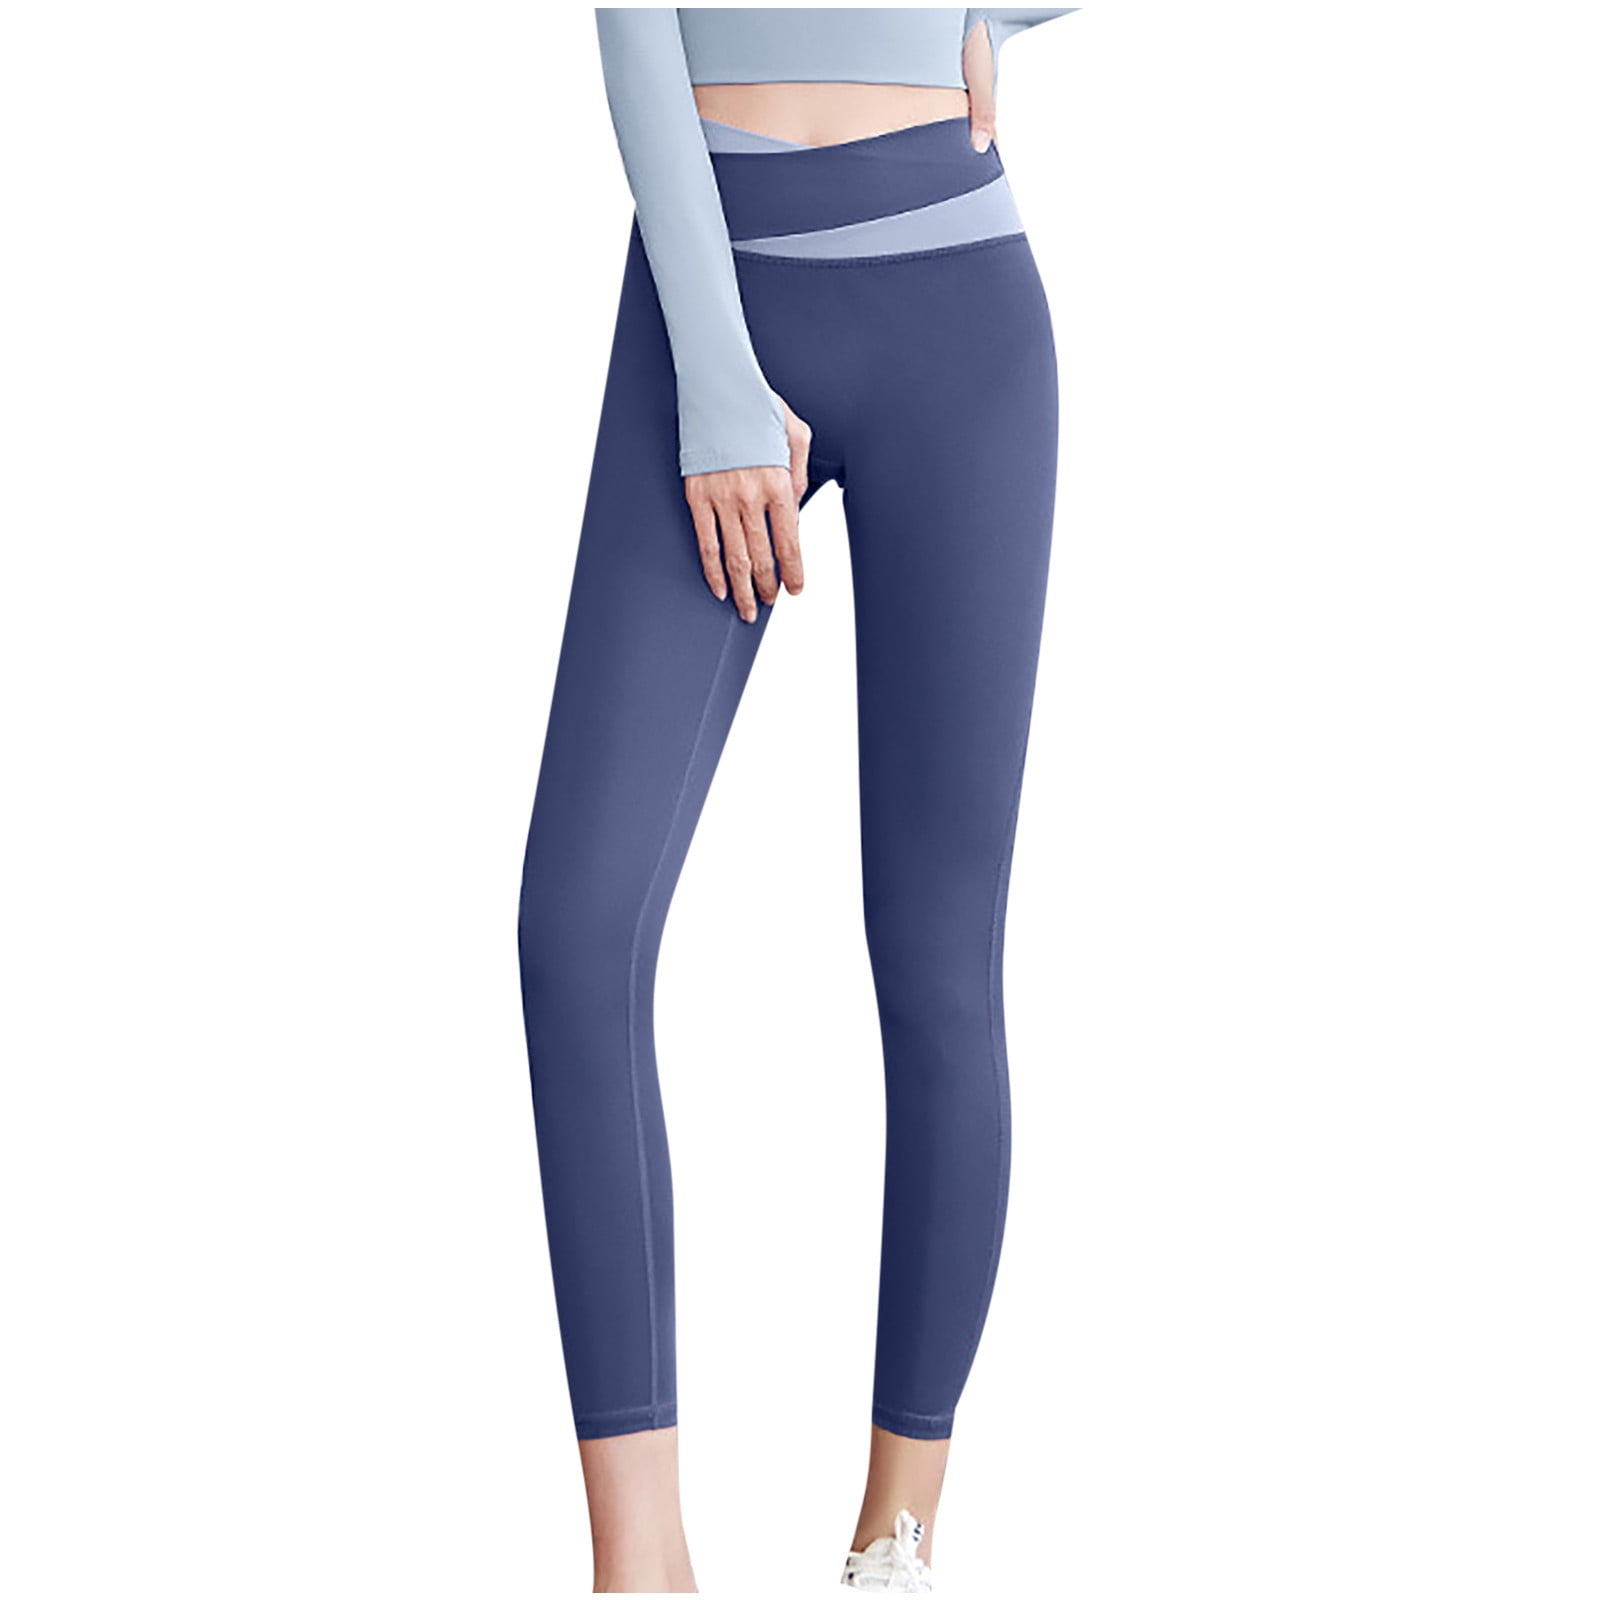 Edvintorg Yoga Pants Clearance Fashion Patchwork Color Crossover High Waist Hip Lift Sport Leggings Quick-dry Gym Fitness Workout Tights Blue XL - Walmart.com